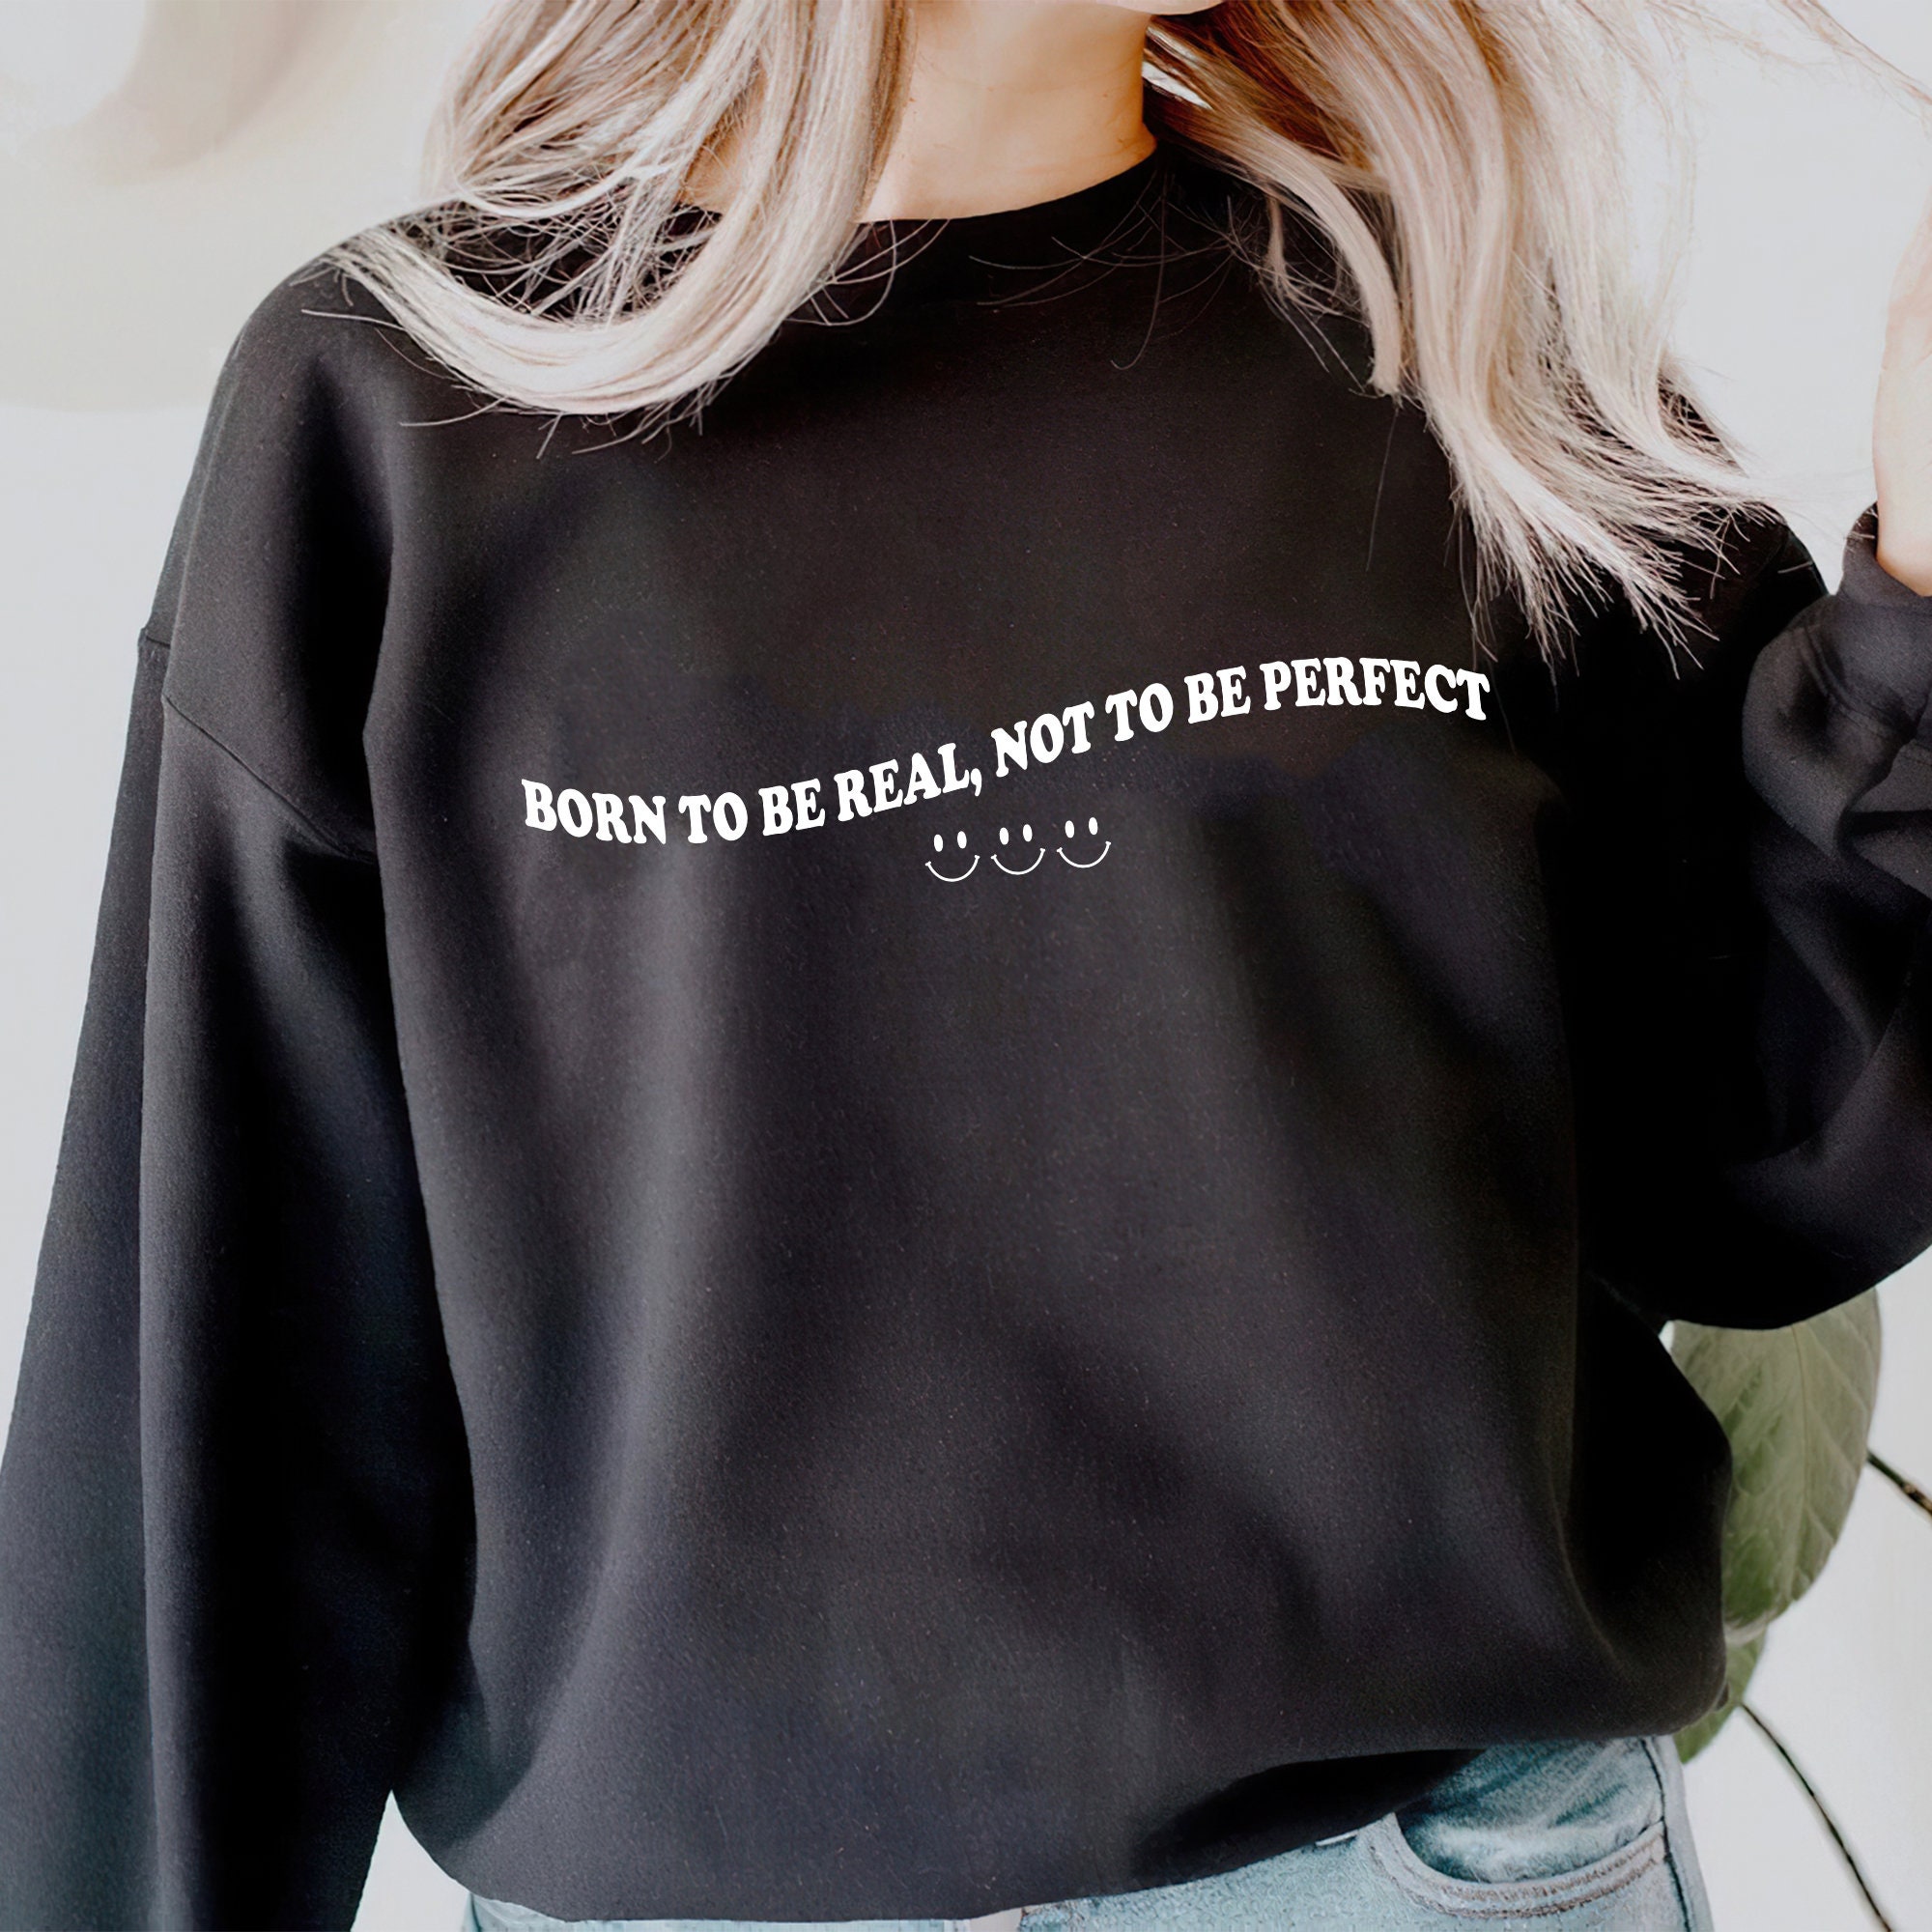 Born to Be Real Not to Be Perfect Sweatshirt Cute Shirt | Etsy